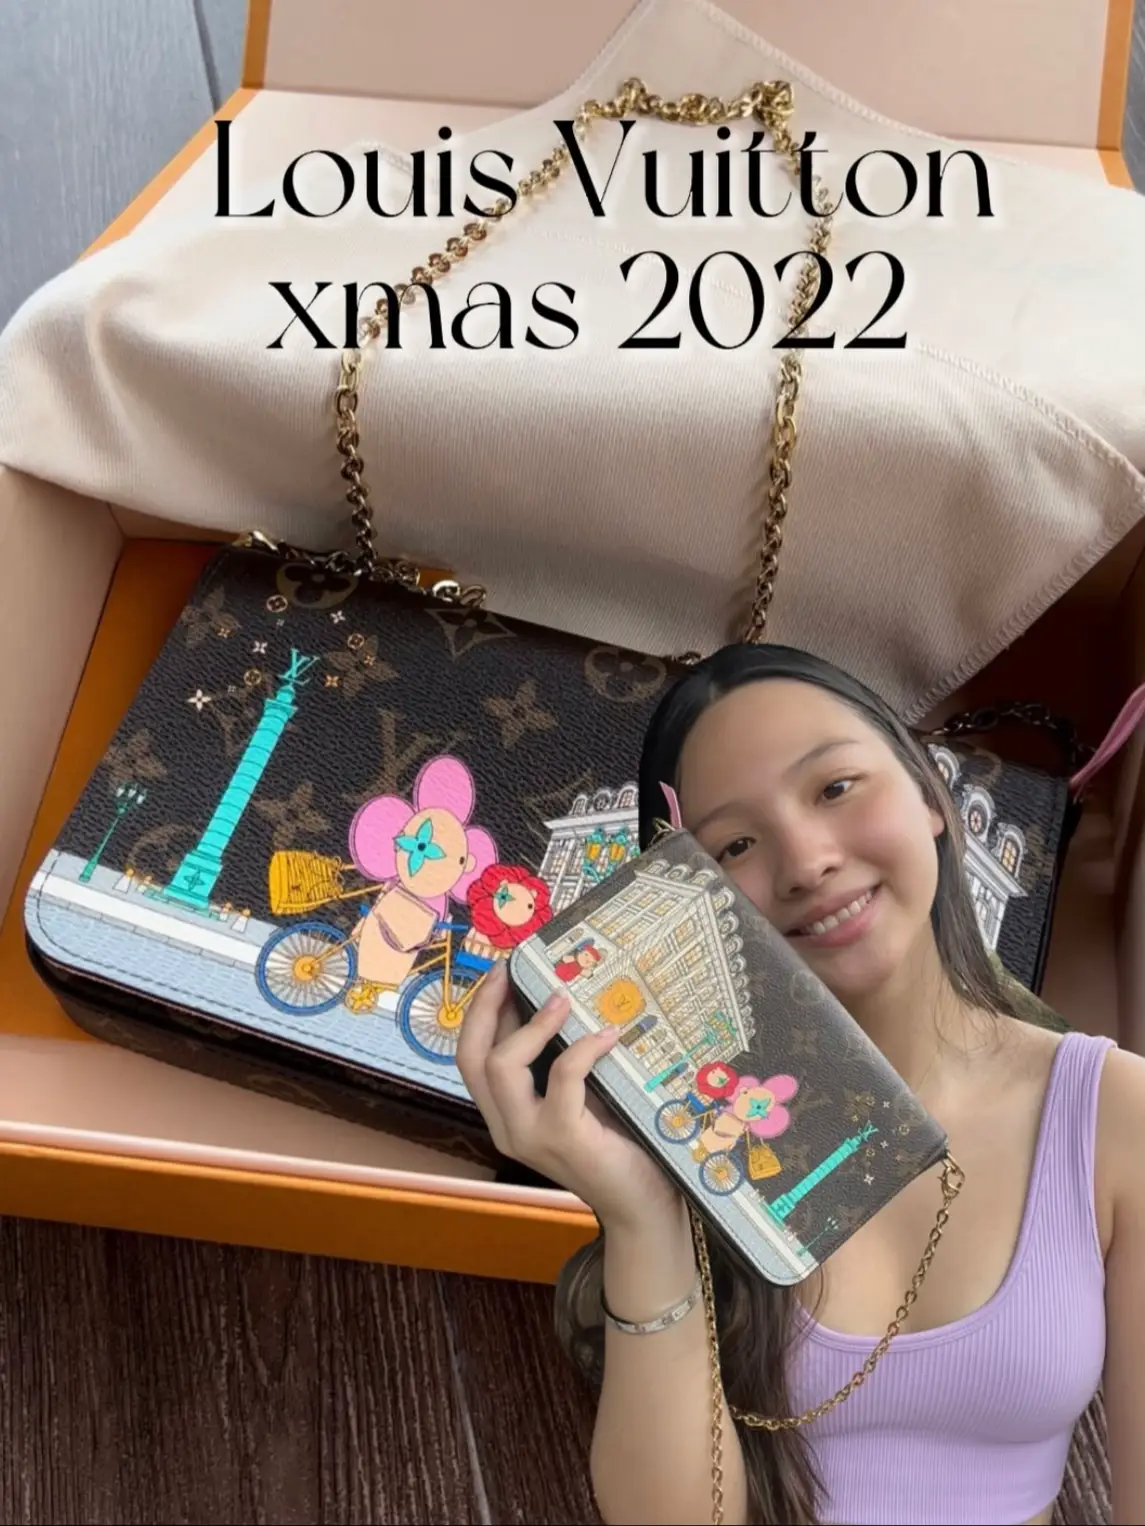 🎄 unbox LV's xmas bag with me!  Video published by gisele rei